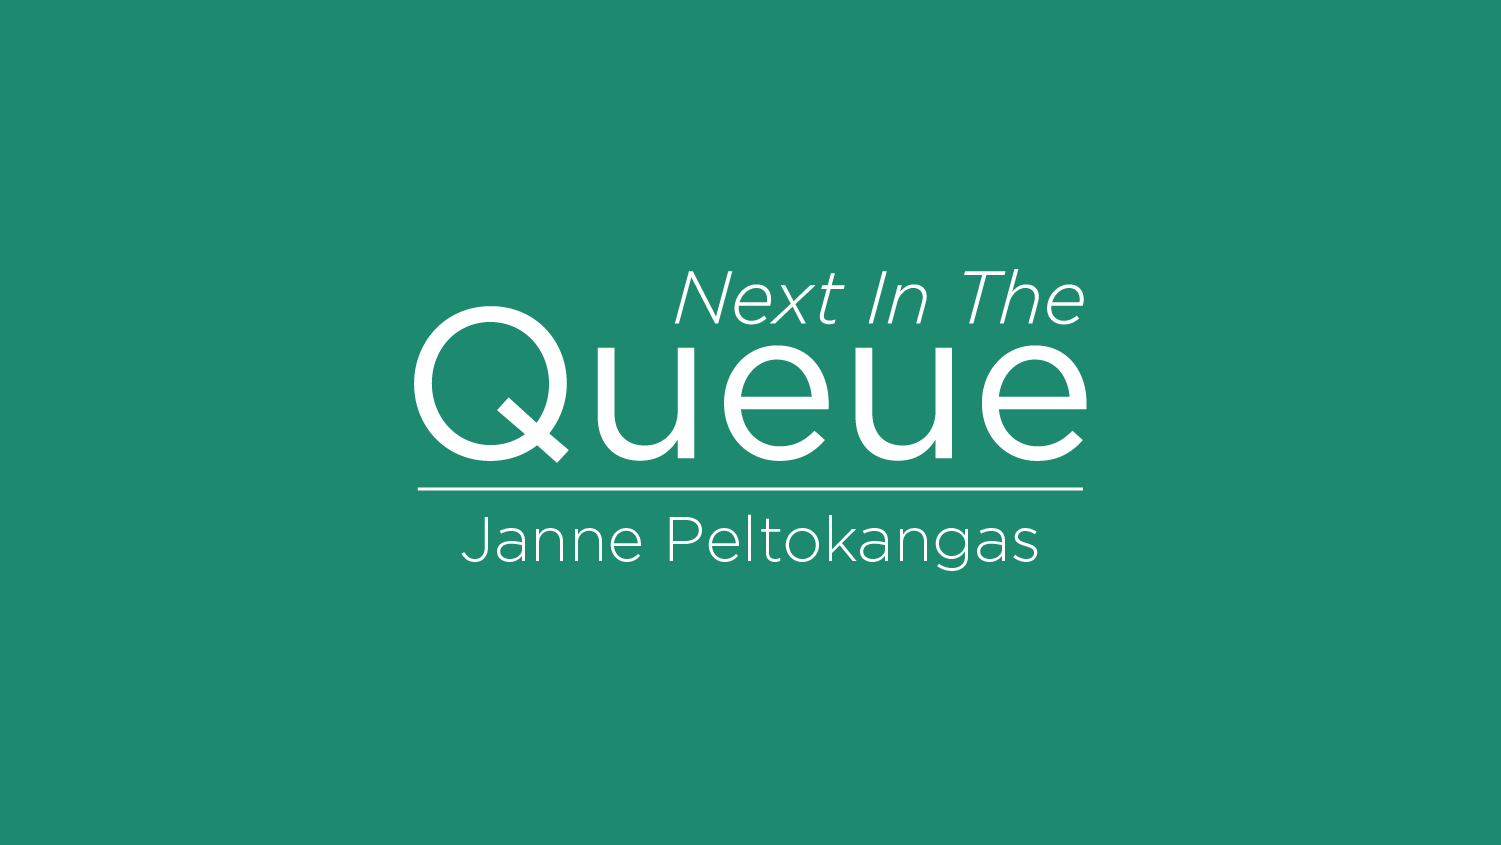 blog post cover graphic for the queue featuring janne peltokangas